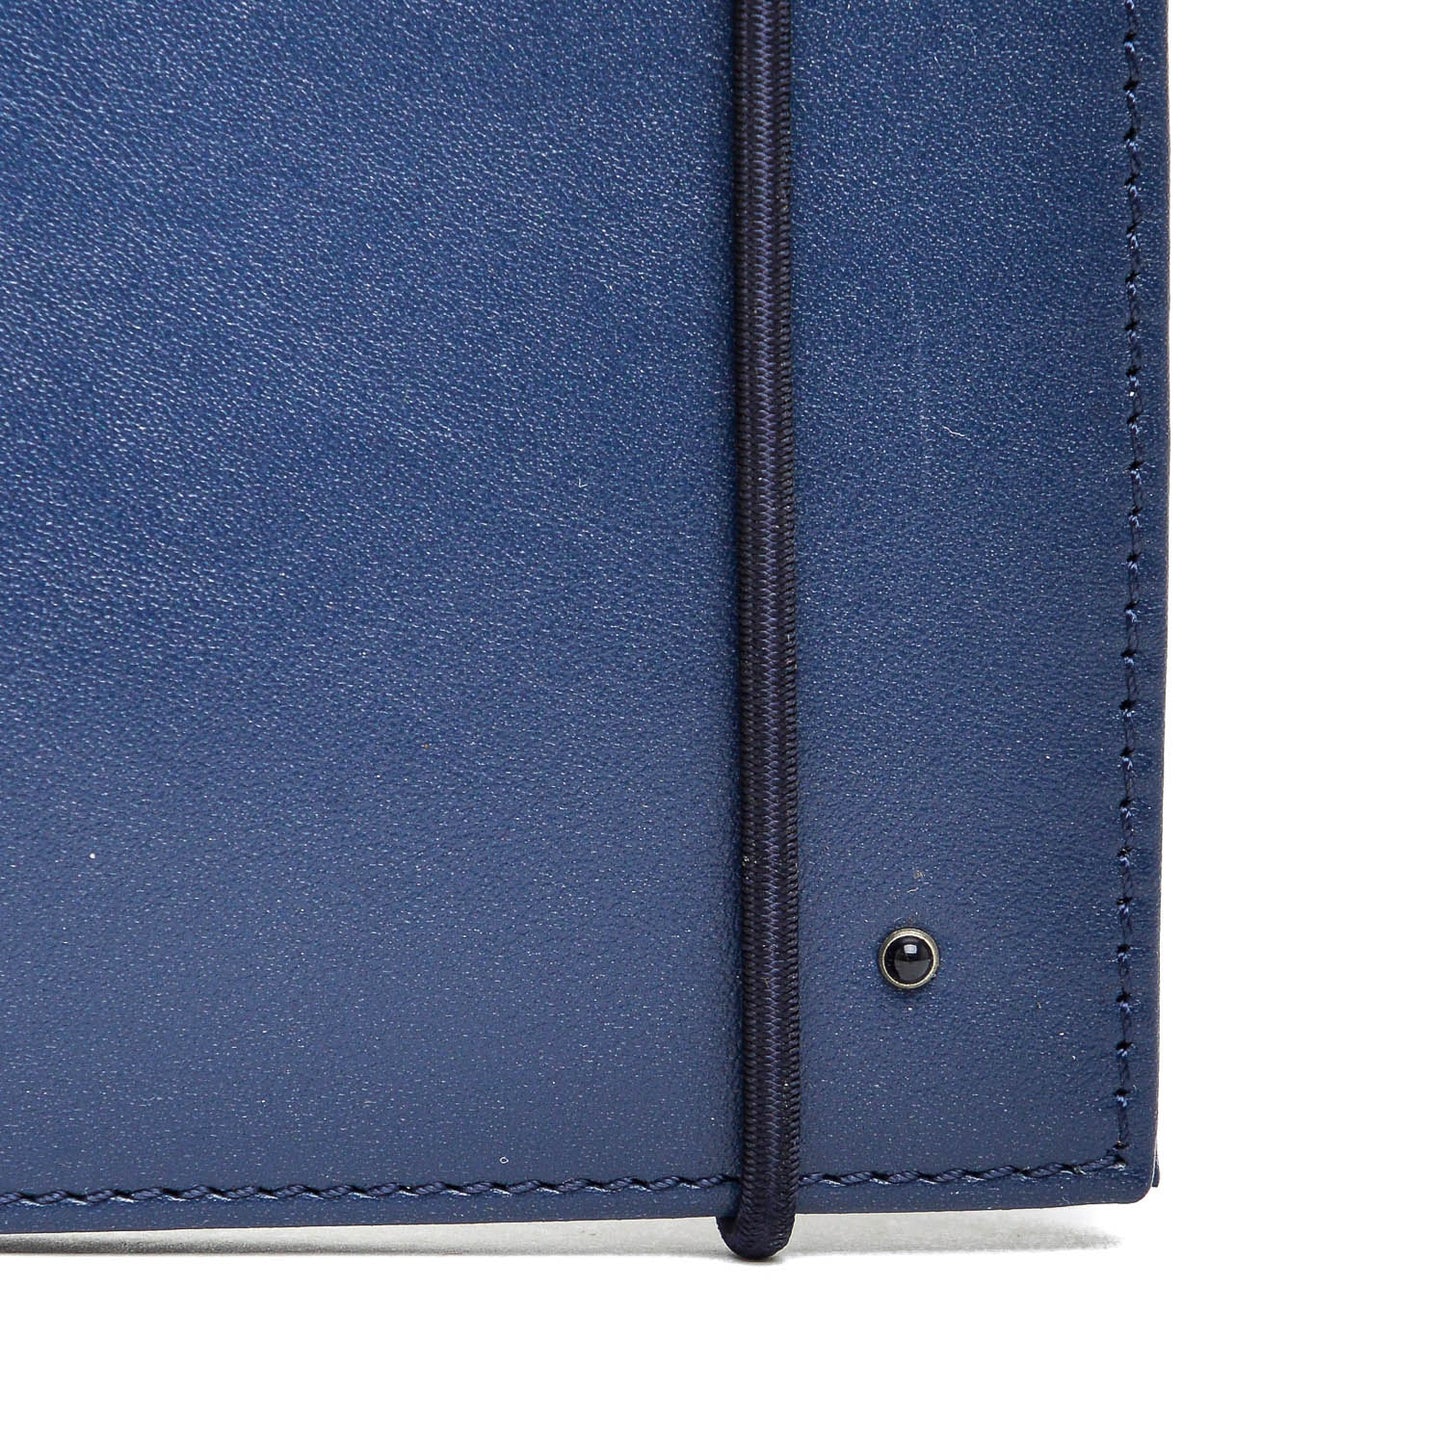 Classic Folding Wallet 1 side Blue Leather